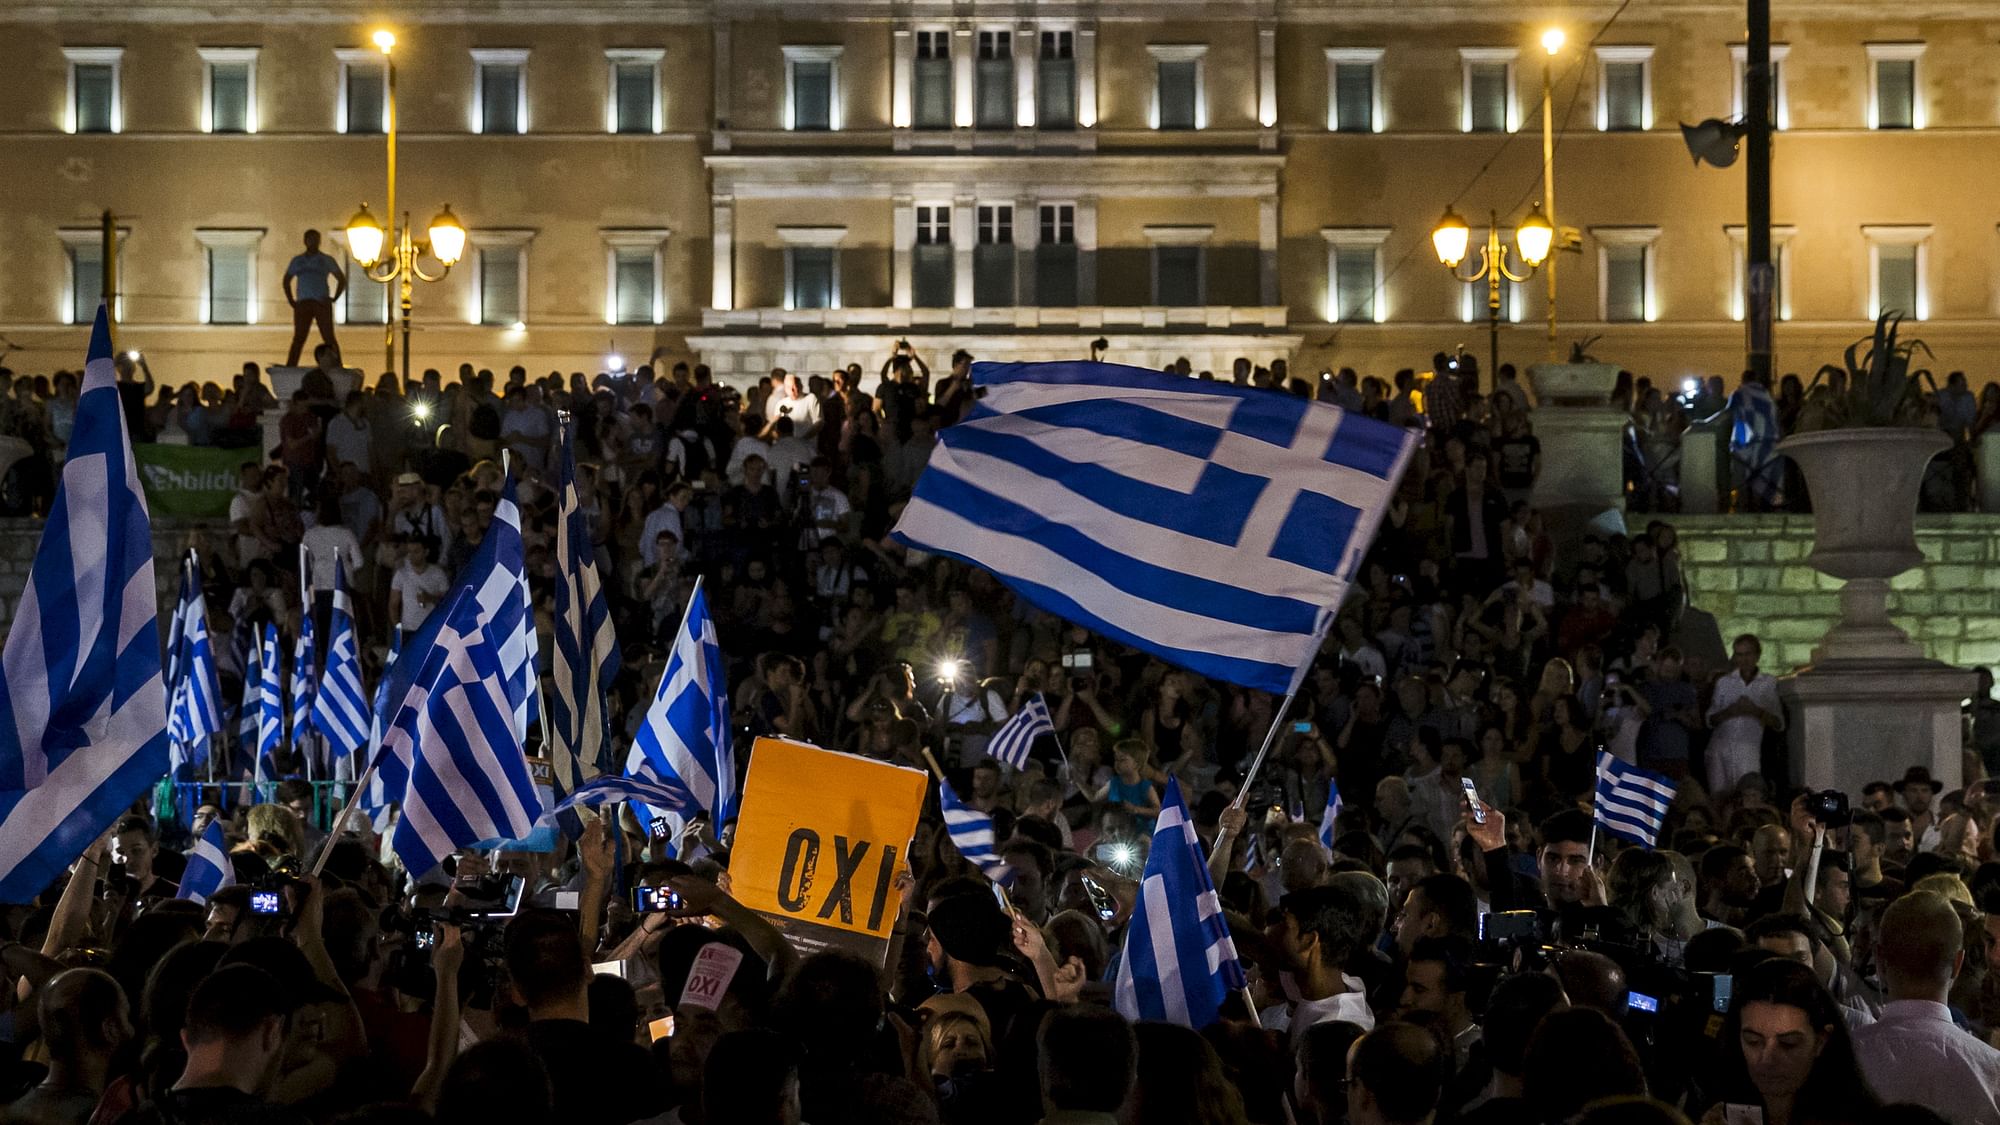 ‘Oxi’, greek for no, says Greece. (Photo: Reuters)